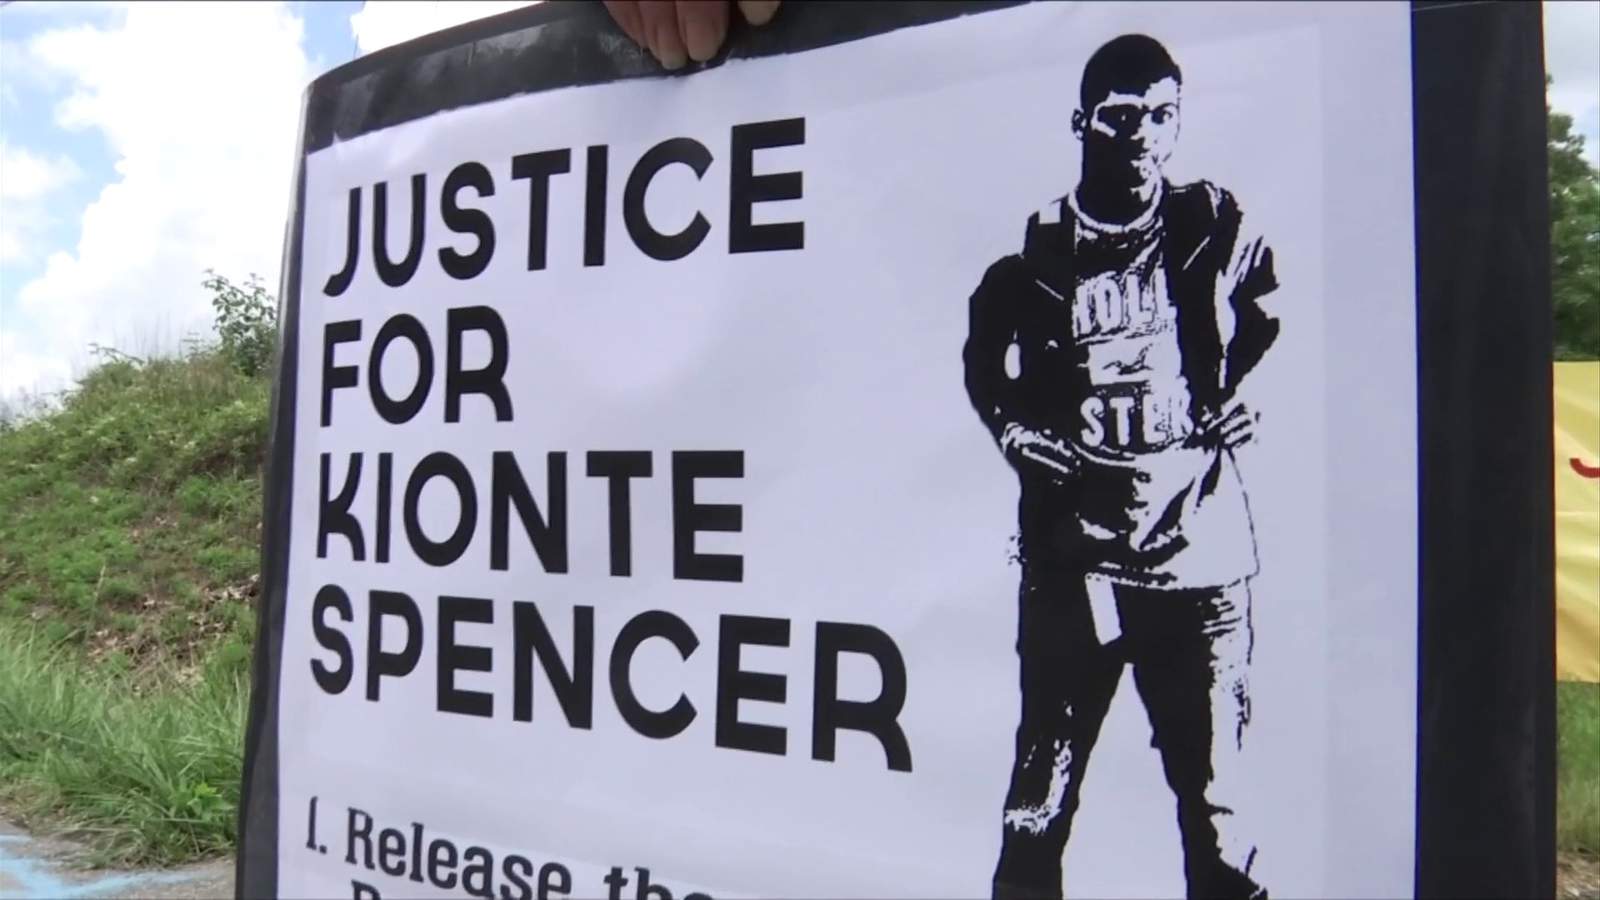 Activists, family call for action in Kionte Spencer case